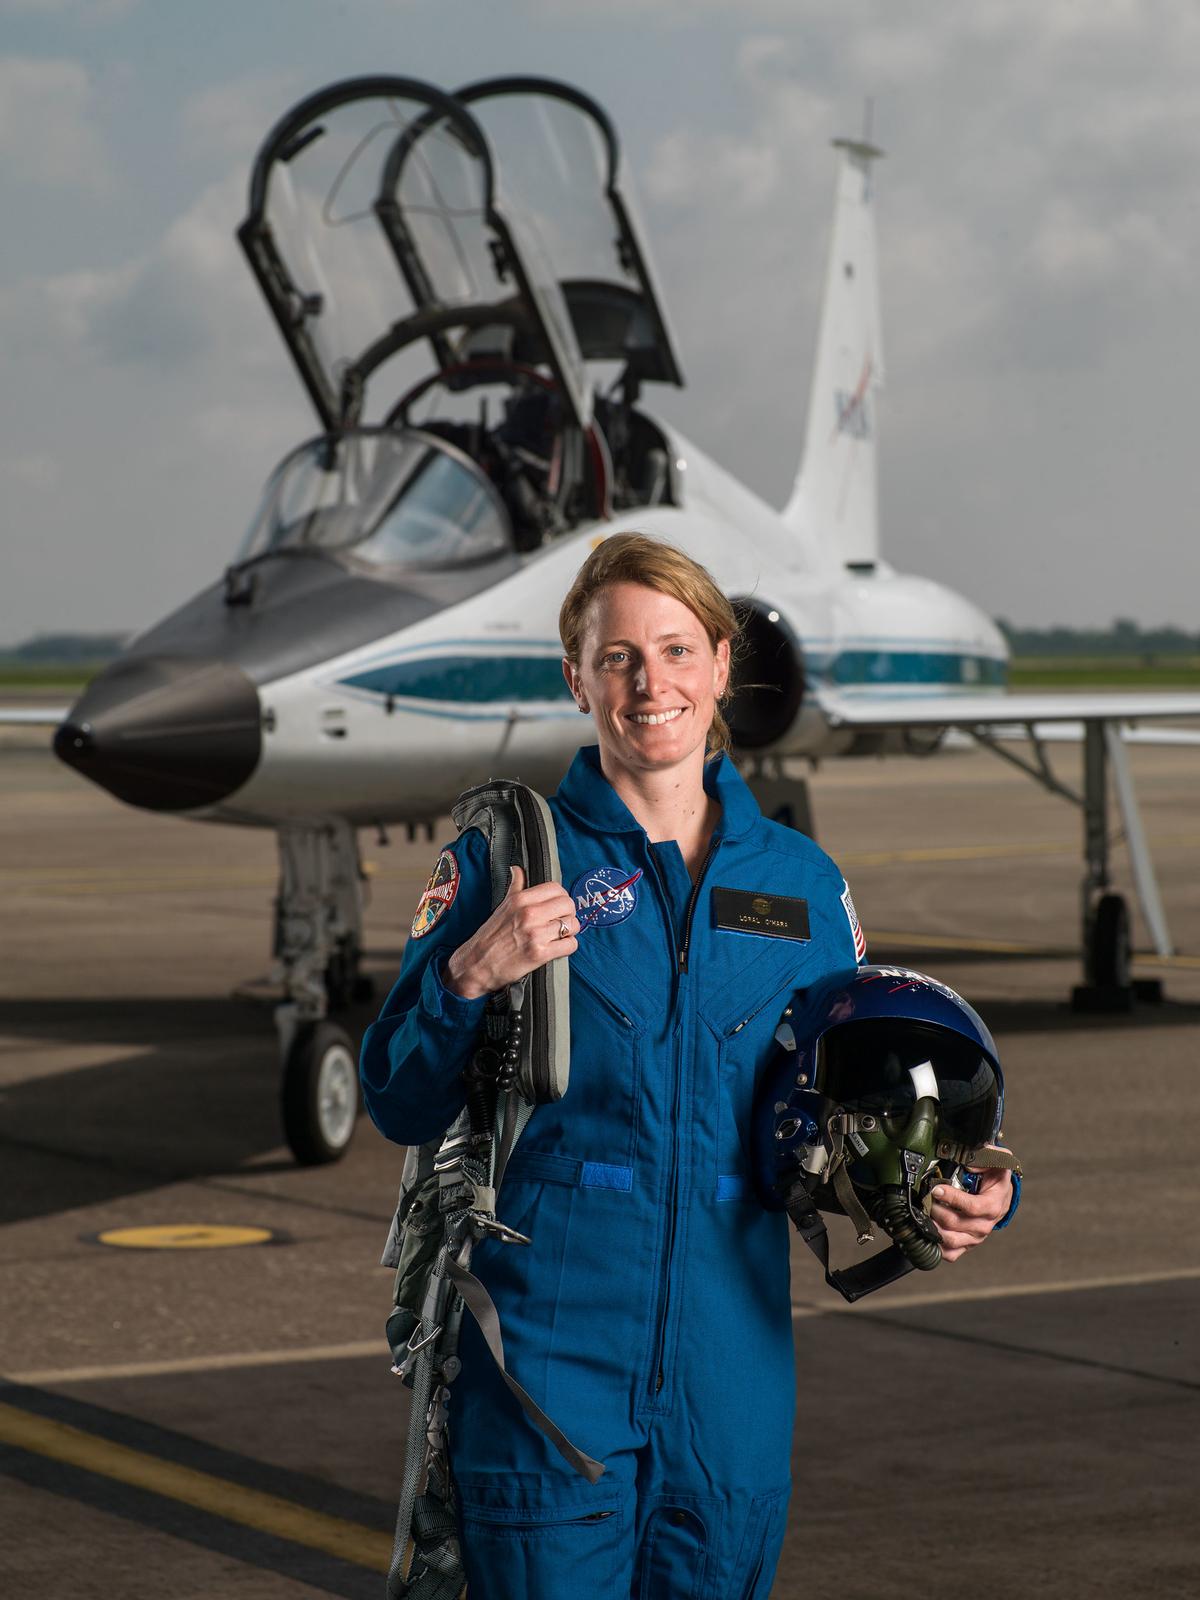 NASA astronaut candidate Loral O'Hara pictured at Ellington Field Joint Reserve Base in Houston, Texas, on June 6, 2017 (©NASA | <a href="https://www.flickr.com/photos/nasa2explore/29832831967/in/album-72157698260056092/">Robert Markowitz</a>)